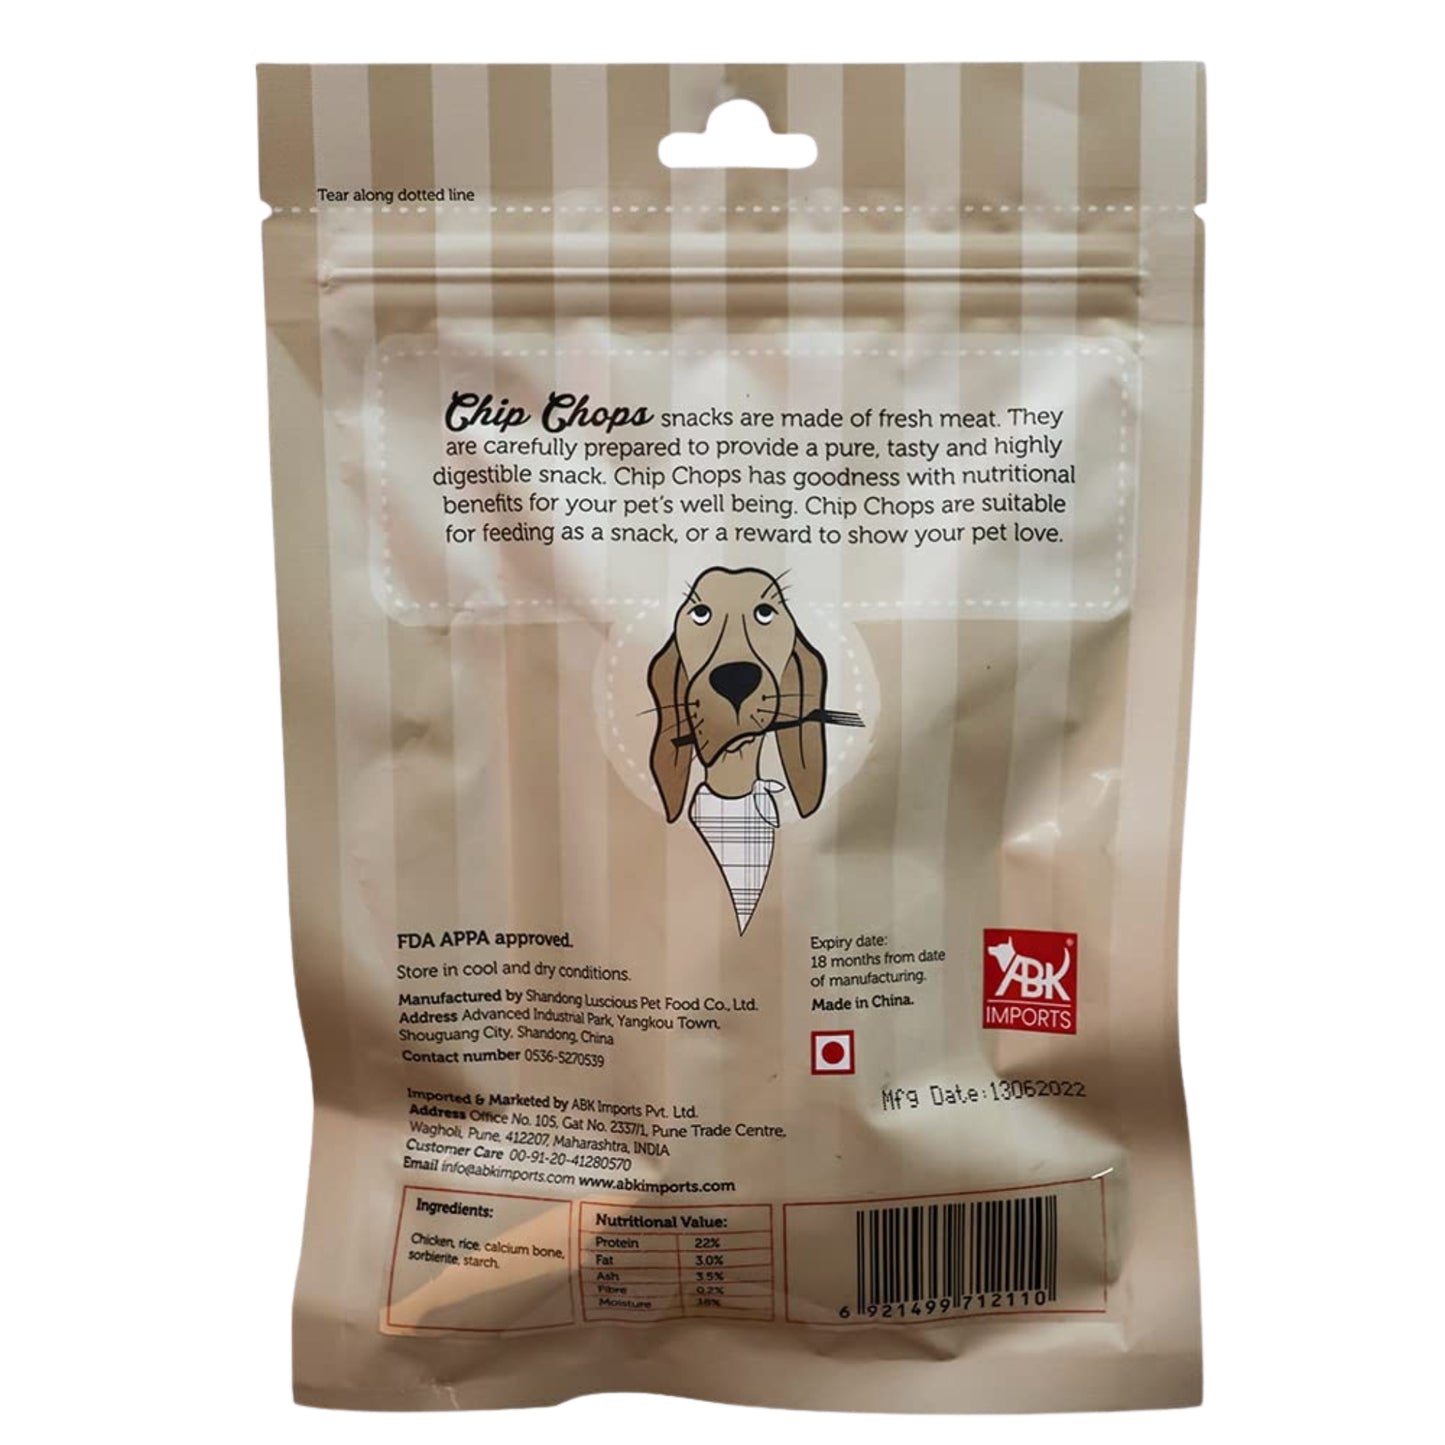 Chip Chops Dog Treats - Fish on Stick (70gm, Pack of 2)